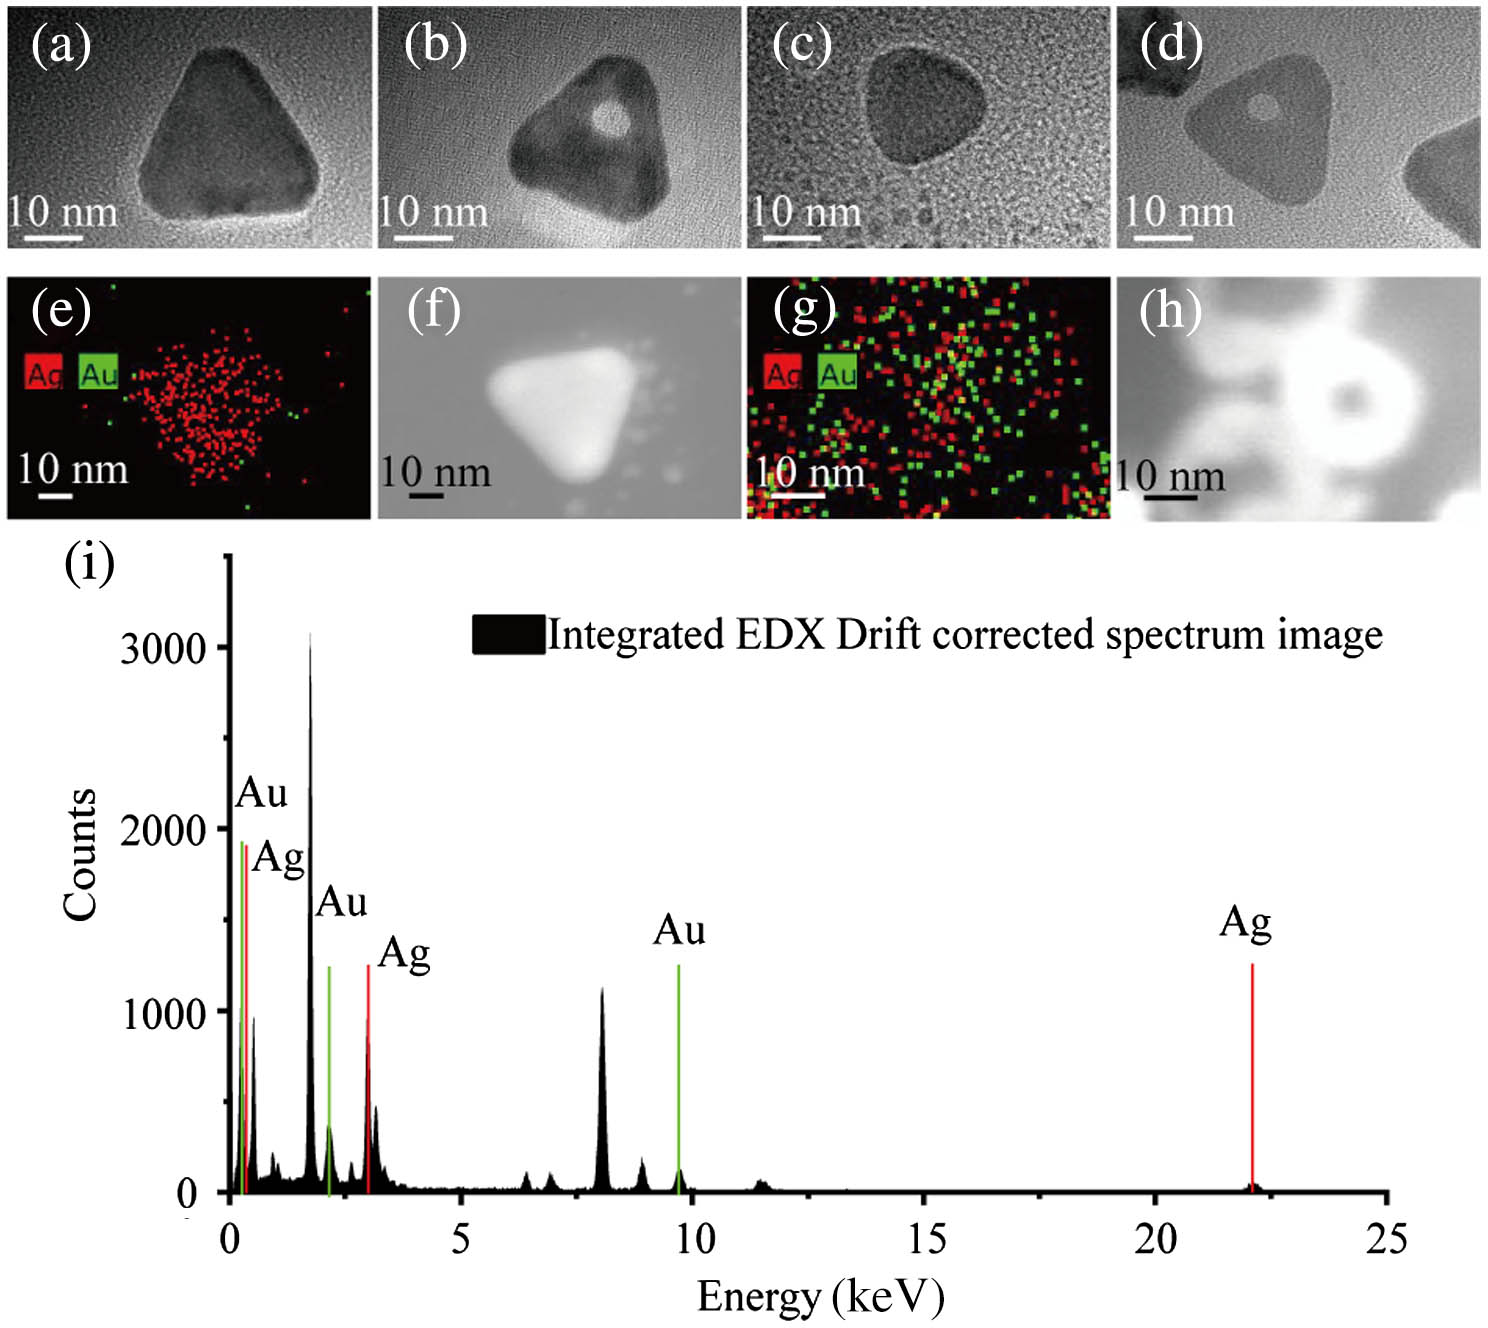 TEM images of (a) Ag NPs, (b) Ag@Au HNS, (c) Ag NPs/TDBC, and (d) Ag@Au HNS/TDBC. (e) and (g) Mapping of elements (distribution of Ag/Au element) of Ag NPs and Ag@Au HNS. (f) and (h) STEM images of Ag NPs and Ag@Au HNS. (i) The energy dispersive X-ray spectroscopy (EDX) analysis of Ag@Au HNS.